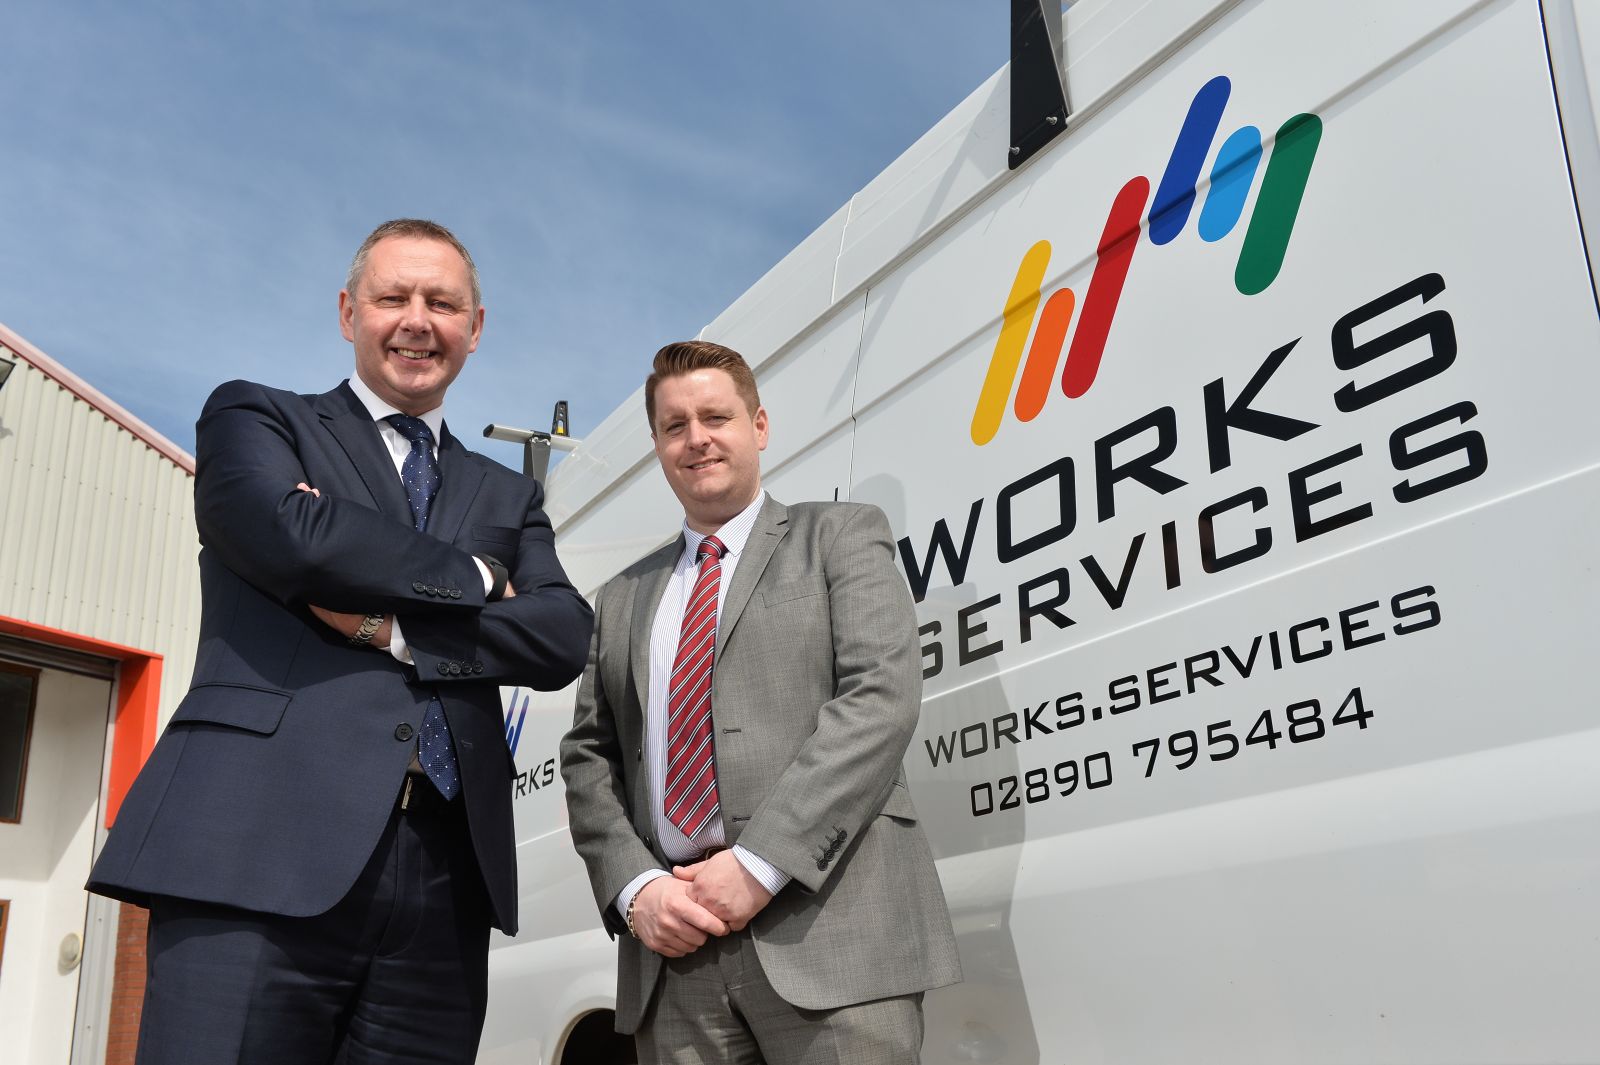 ean Sheehan, Regional Director, NI Consumer & Small Business, Bank of Ireland UK with Philip Tasker, Business Development Manager at Works Services